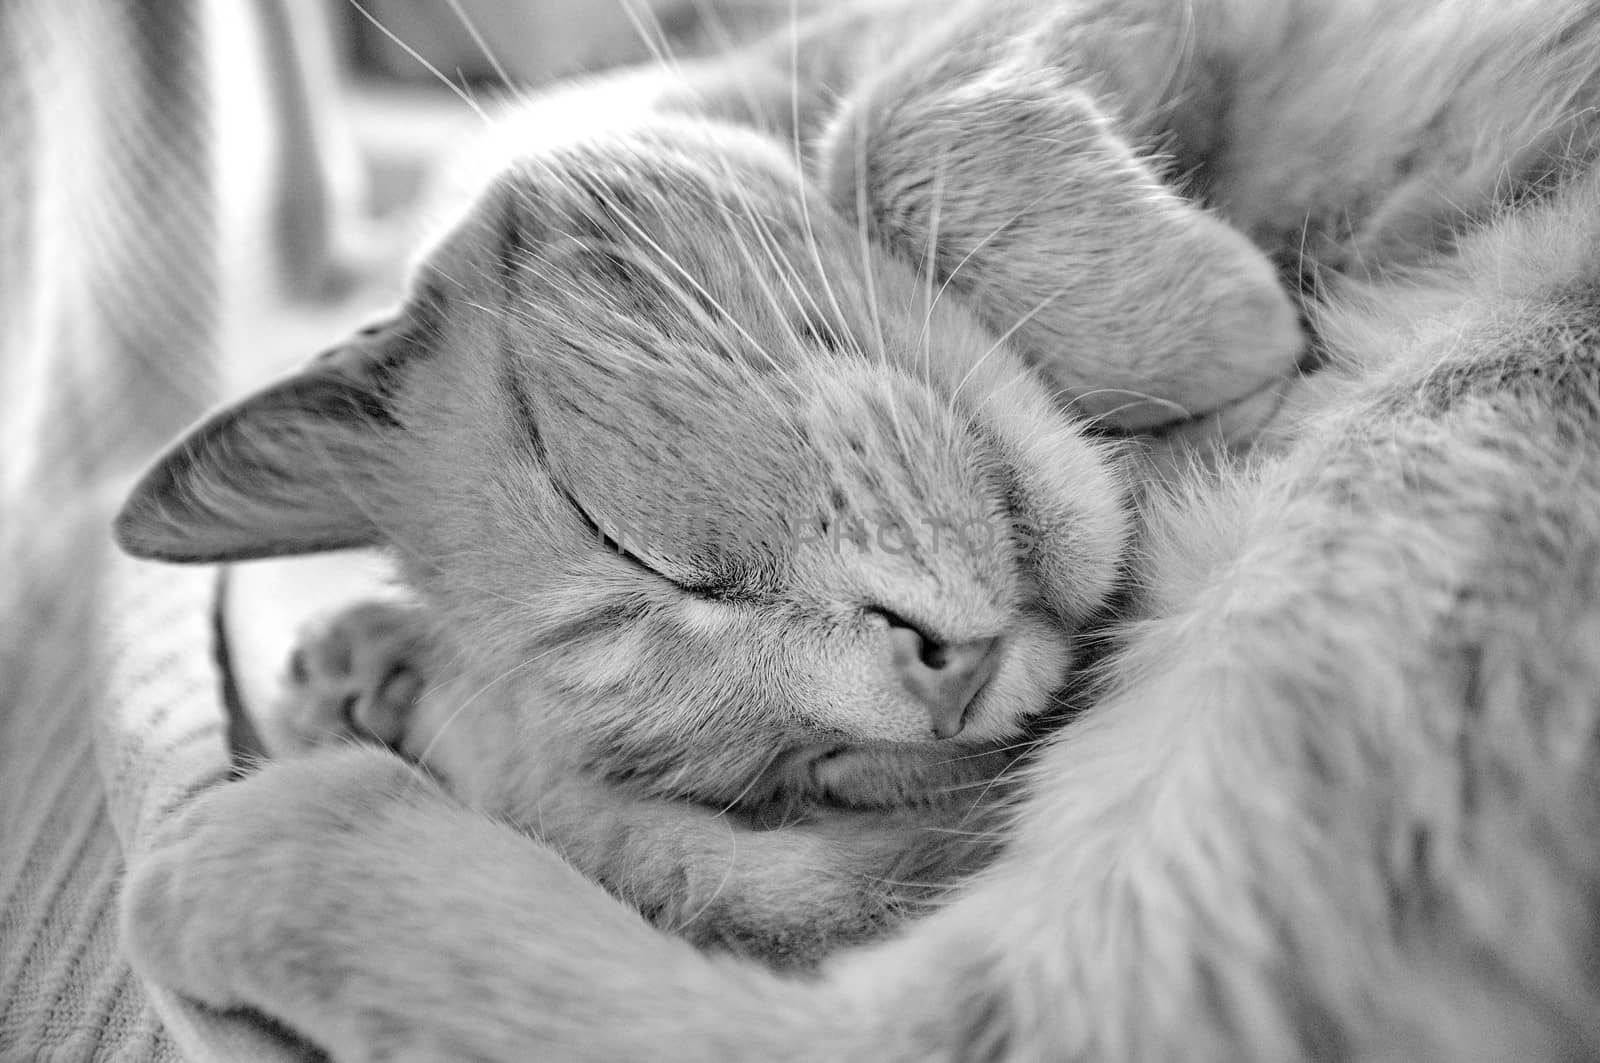 Sleeping cat by anderm